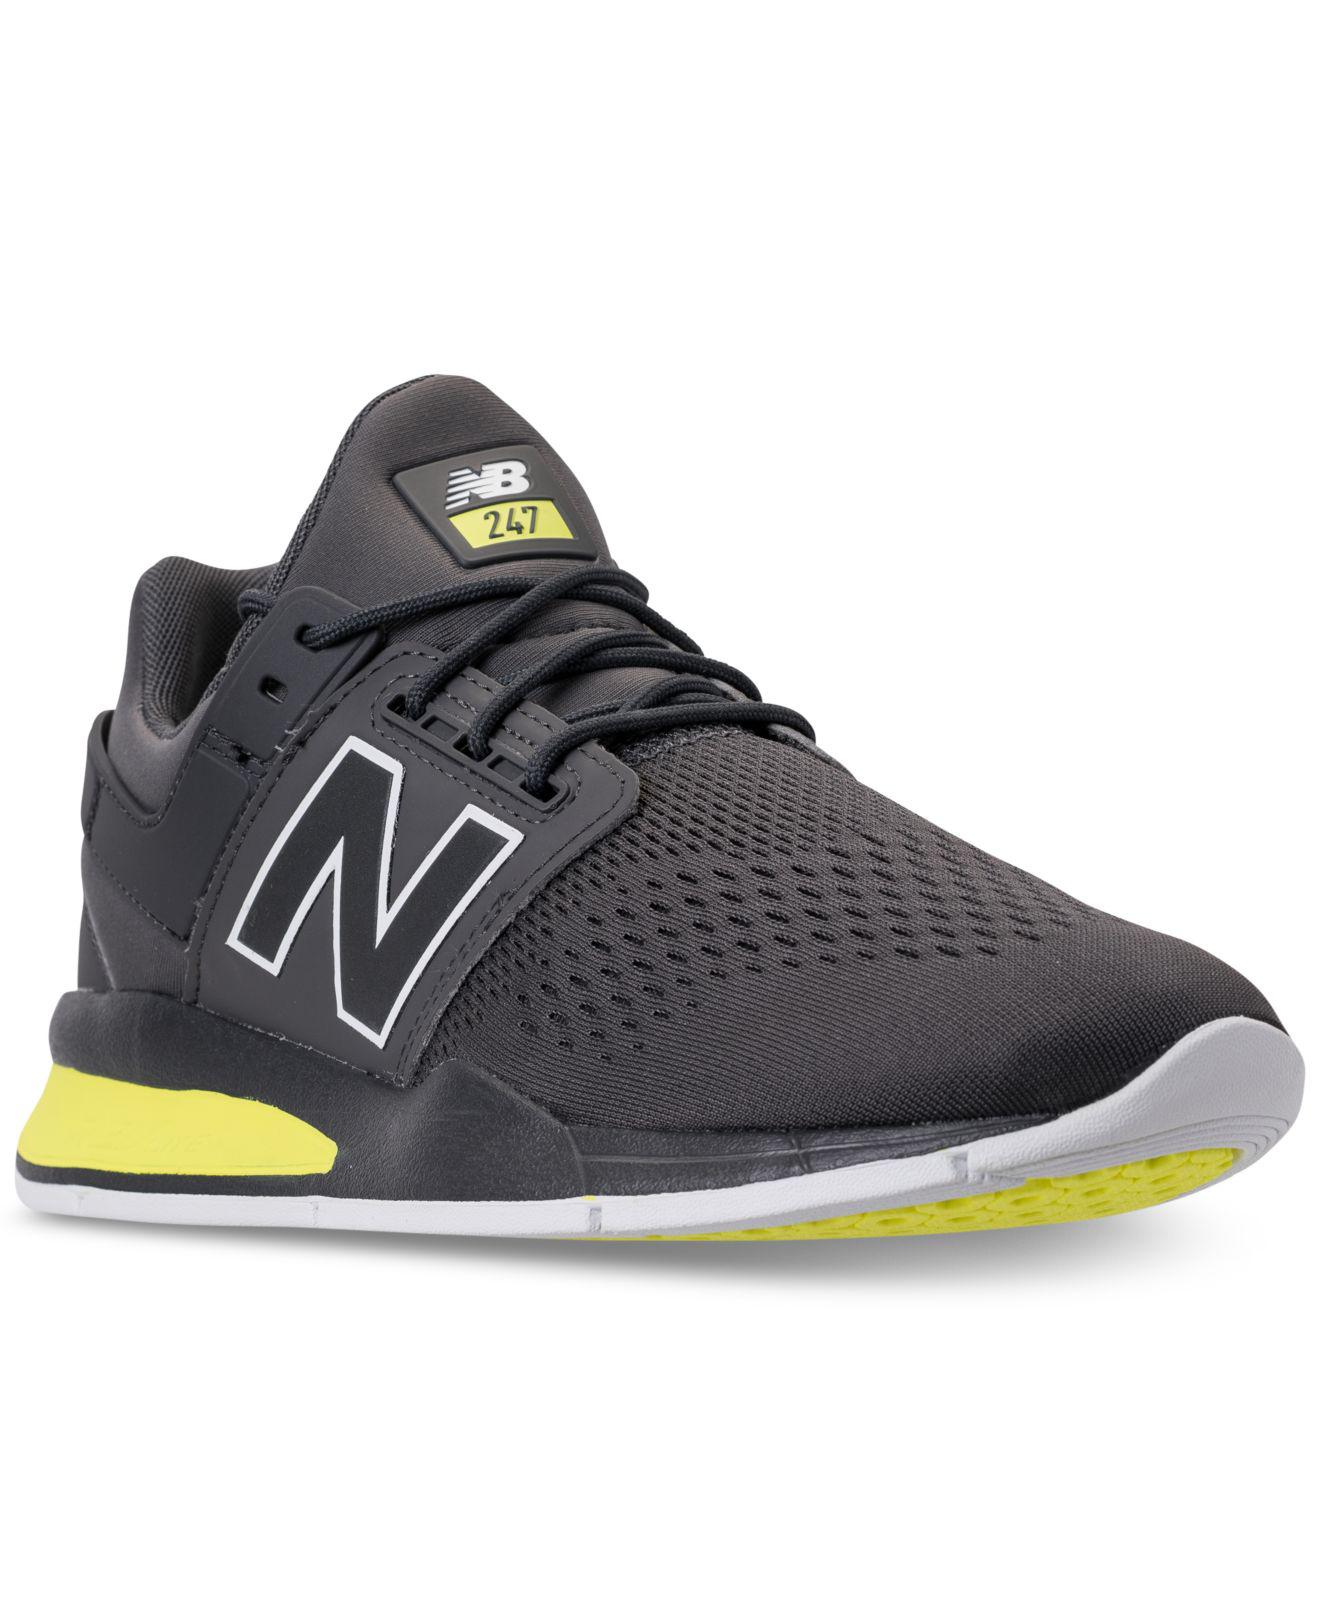 new balance 247 magnet with solar yellow